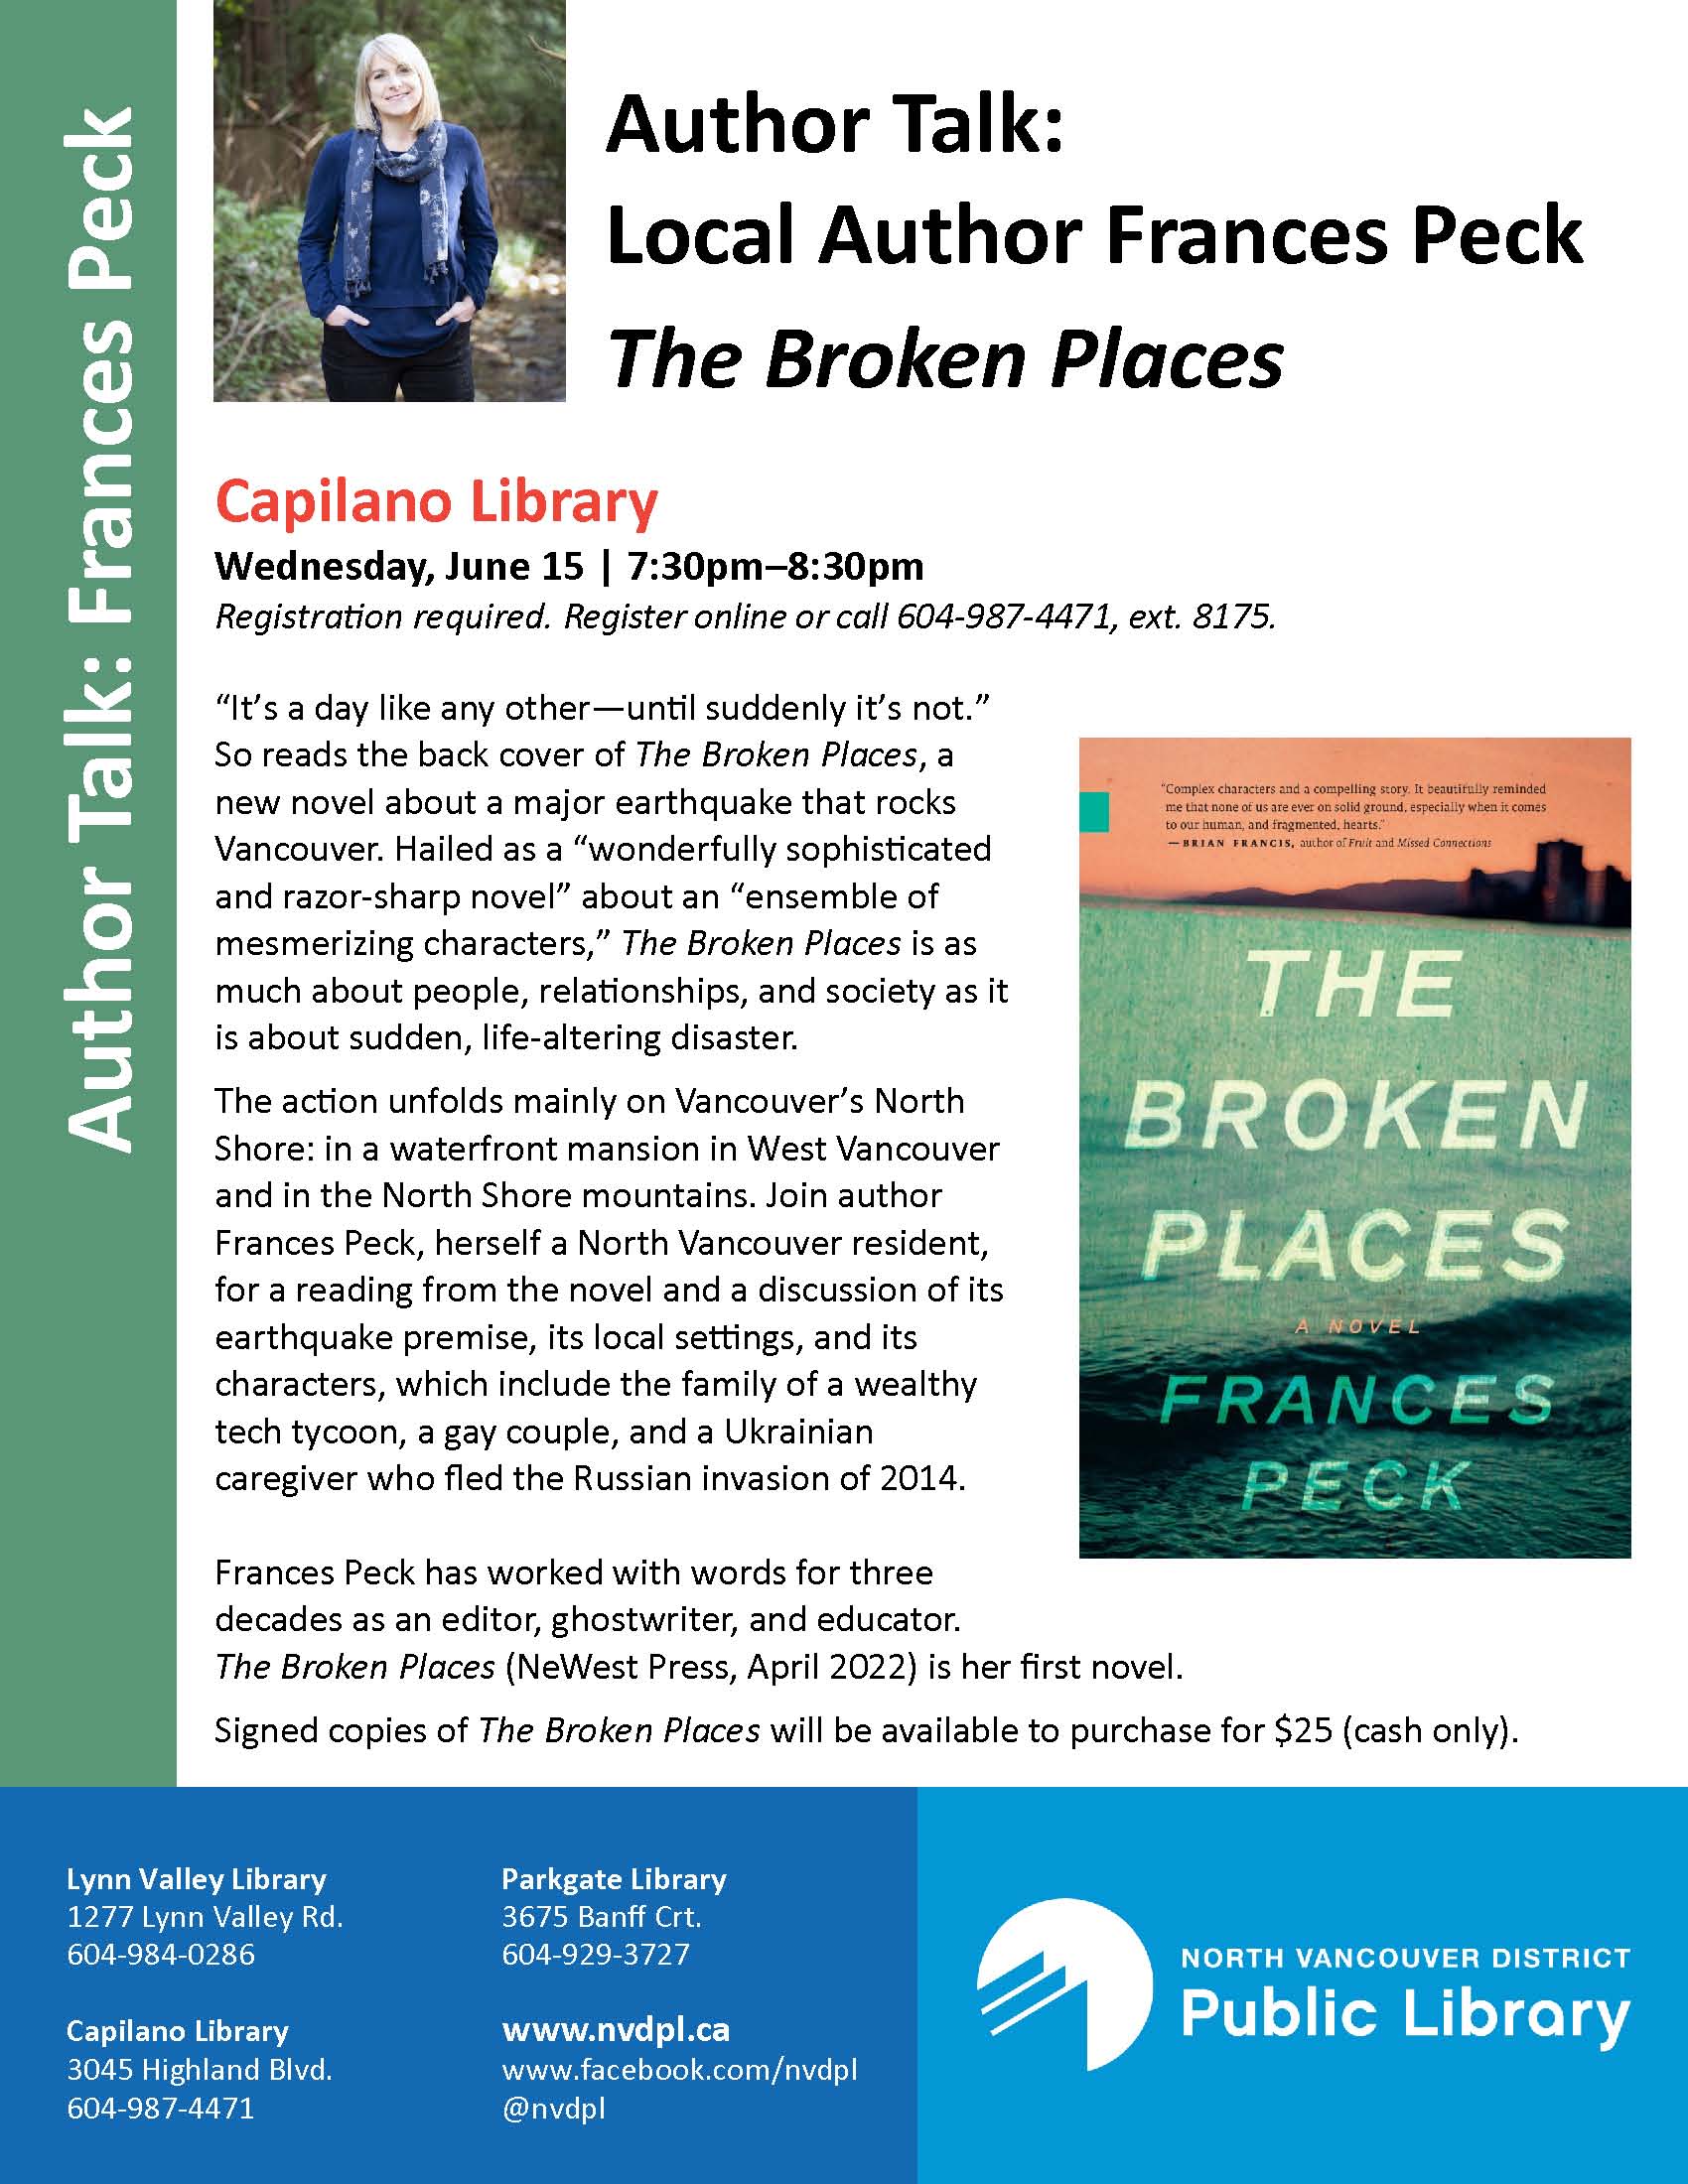 Poster advertising author talk by Frances Peck at the Capilano branch of the North Vancouver District Public Library, June 15, 7:30 to 8:30 pm.